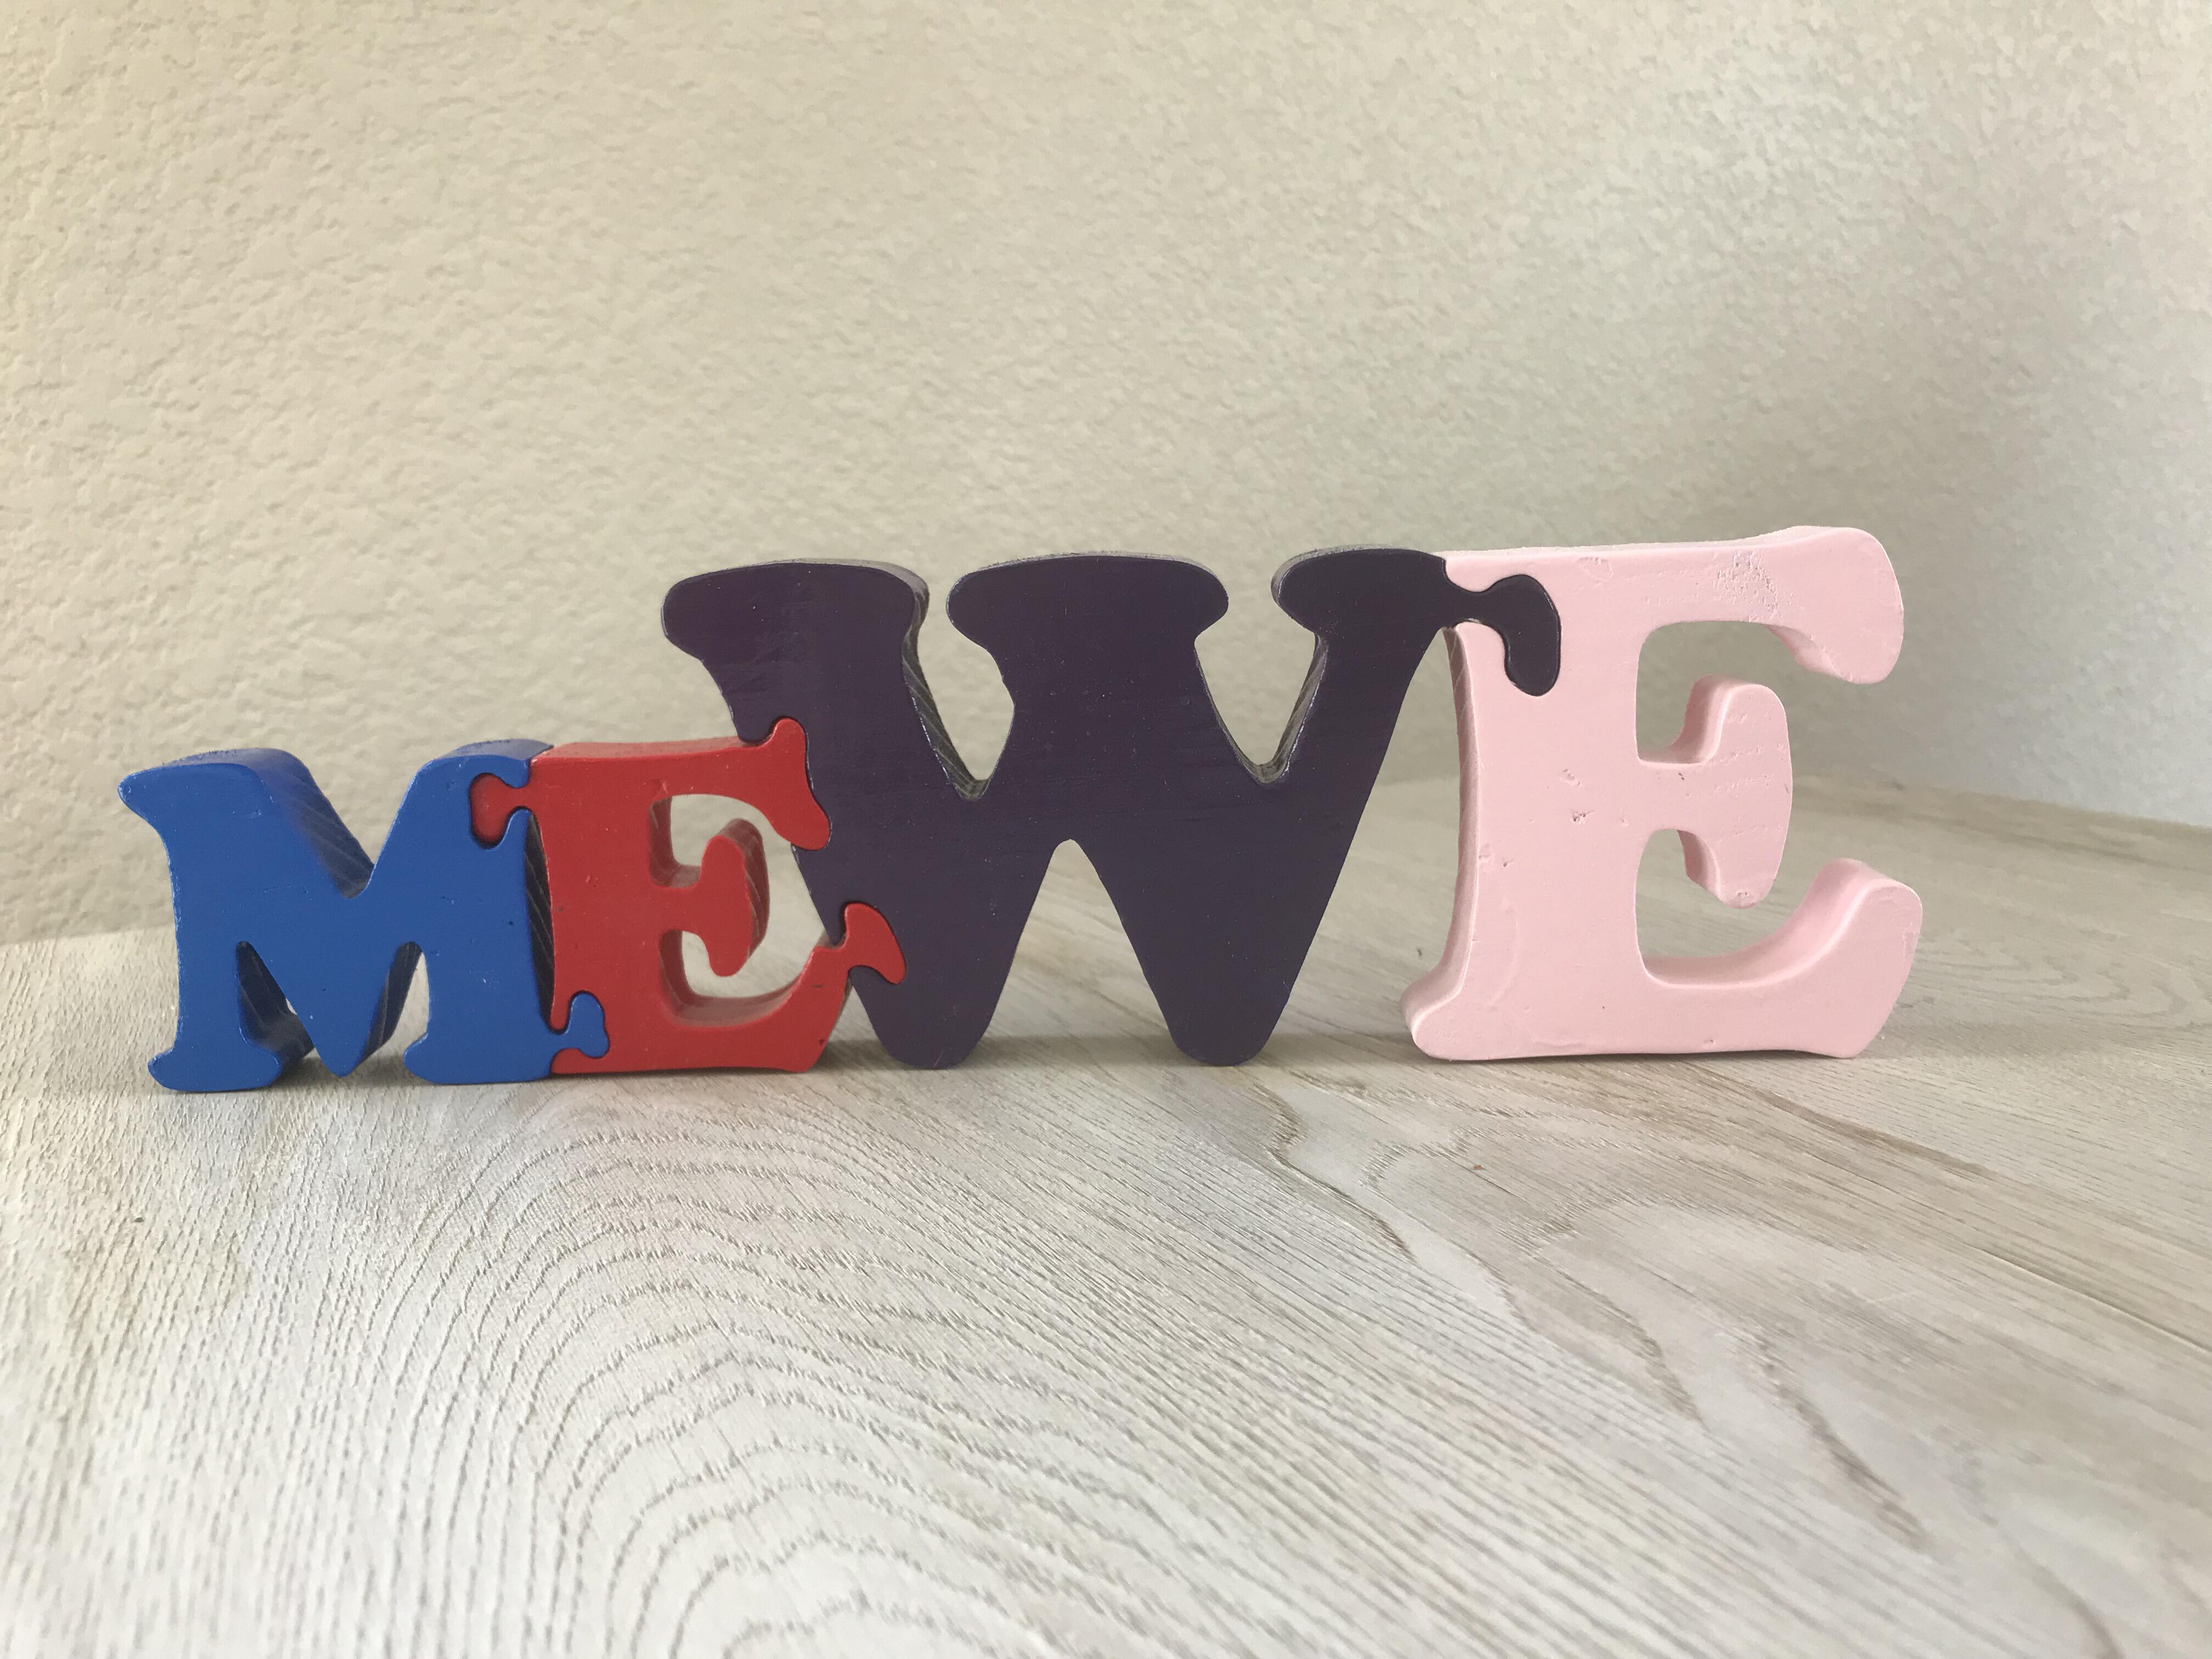 Painted wood letters